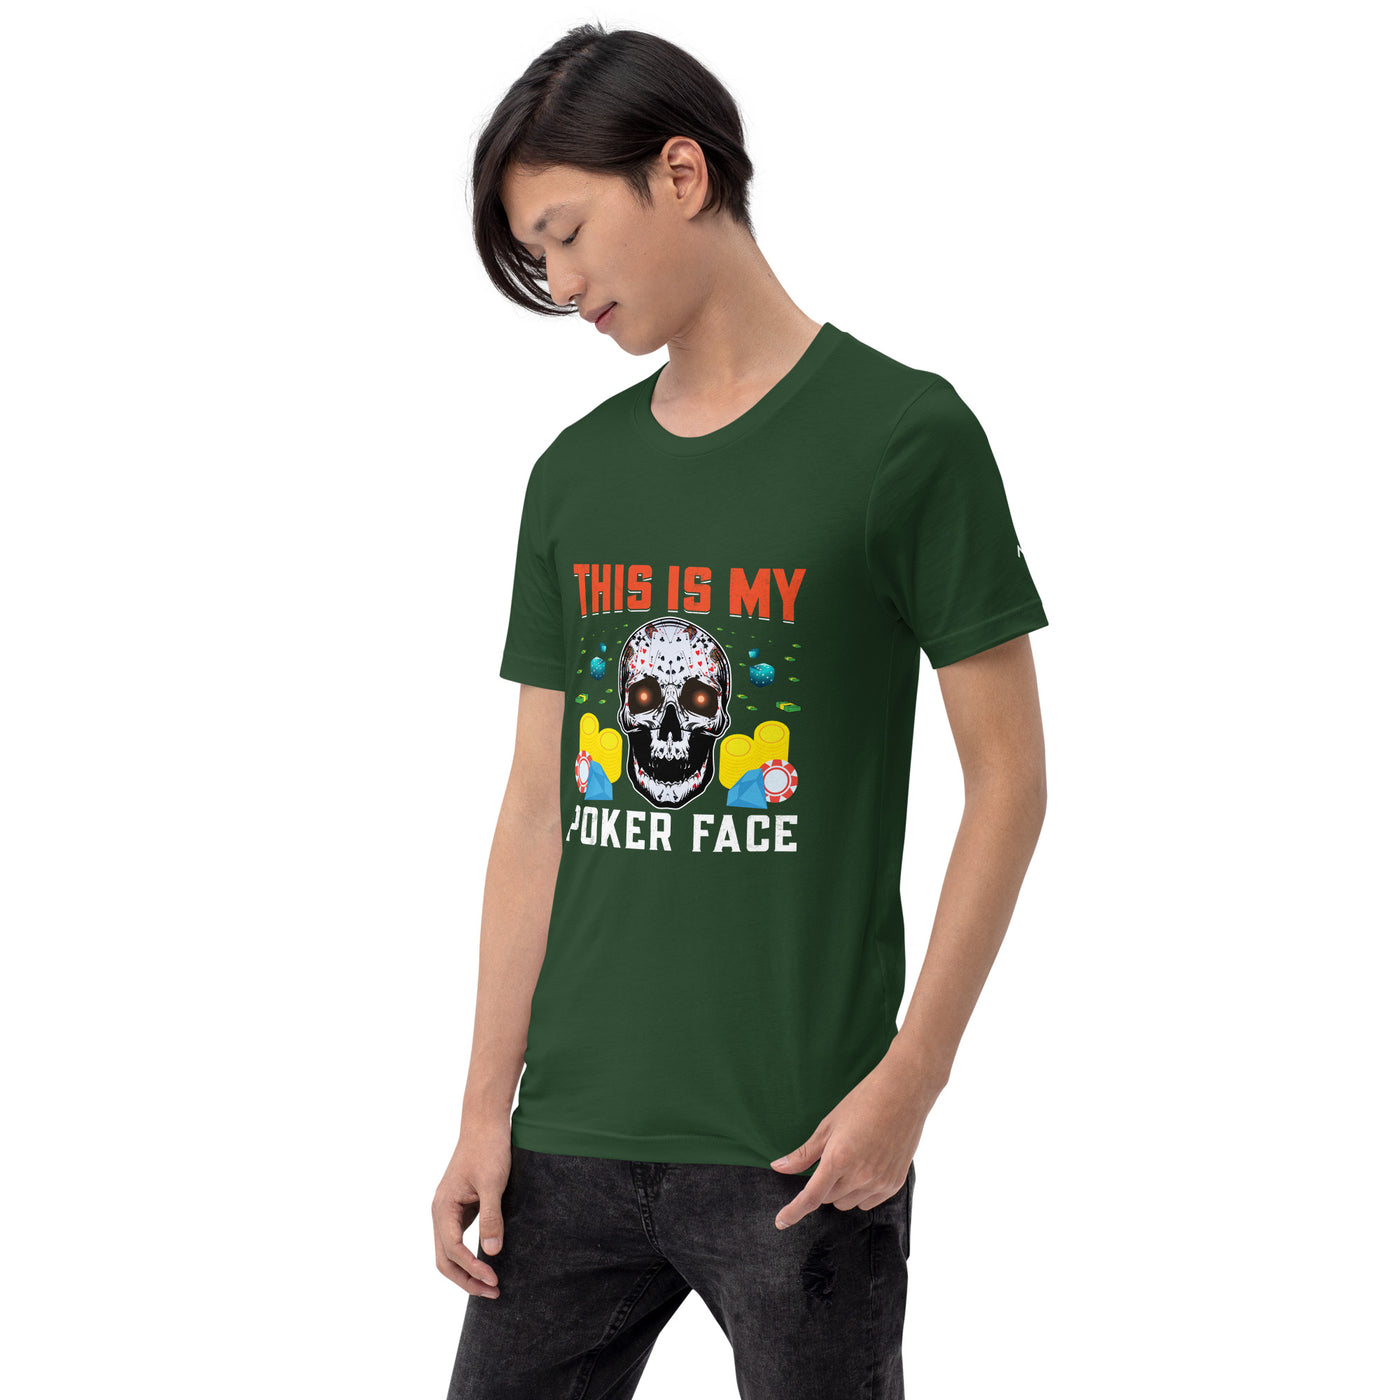 This is My Poker Face - Unisex t-shirt